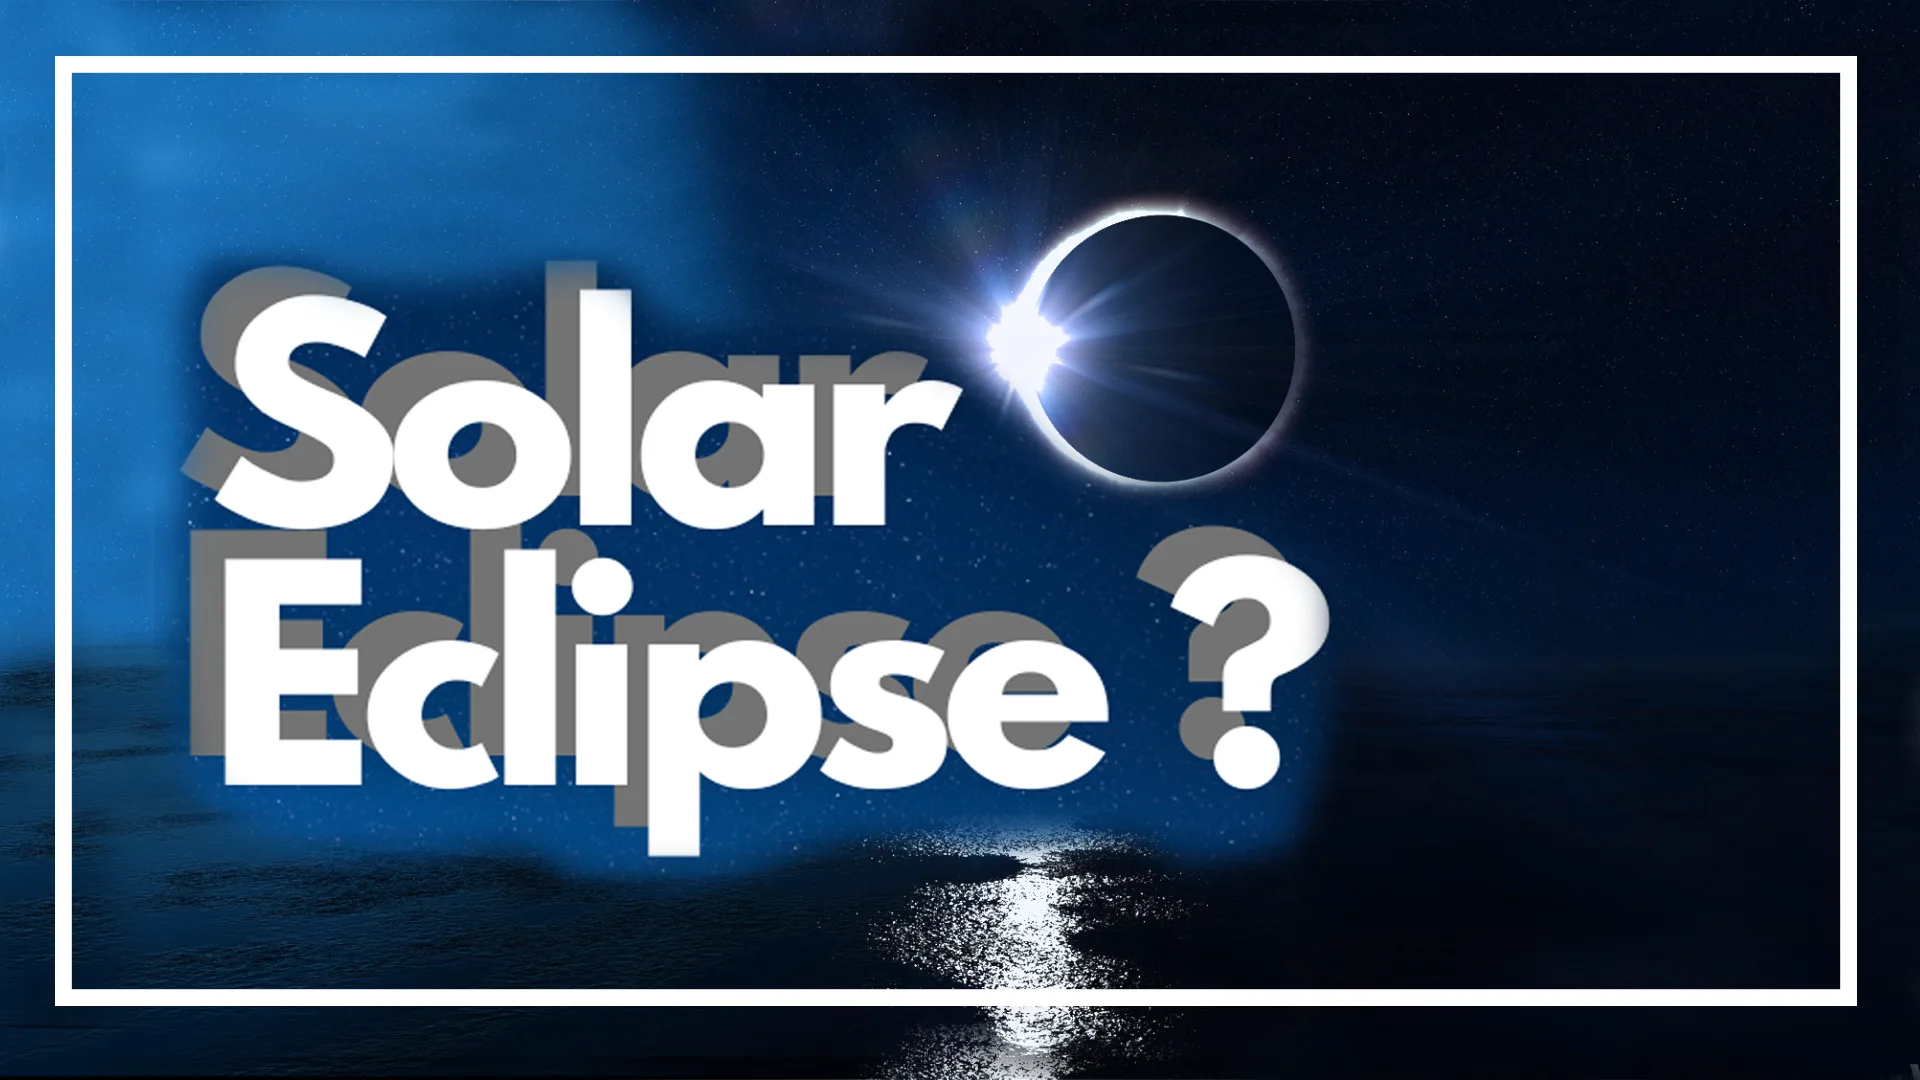 Implications of artificial intelligence for Solar Eclipse